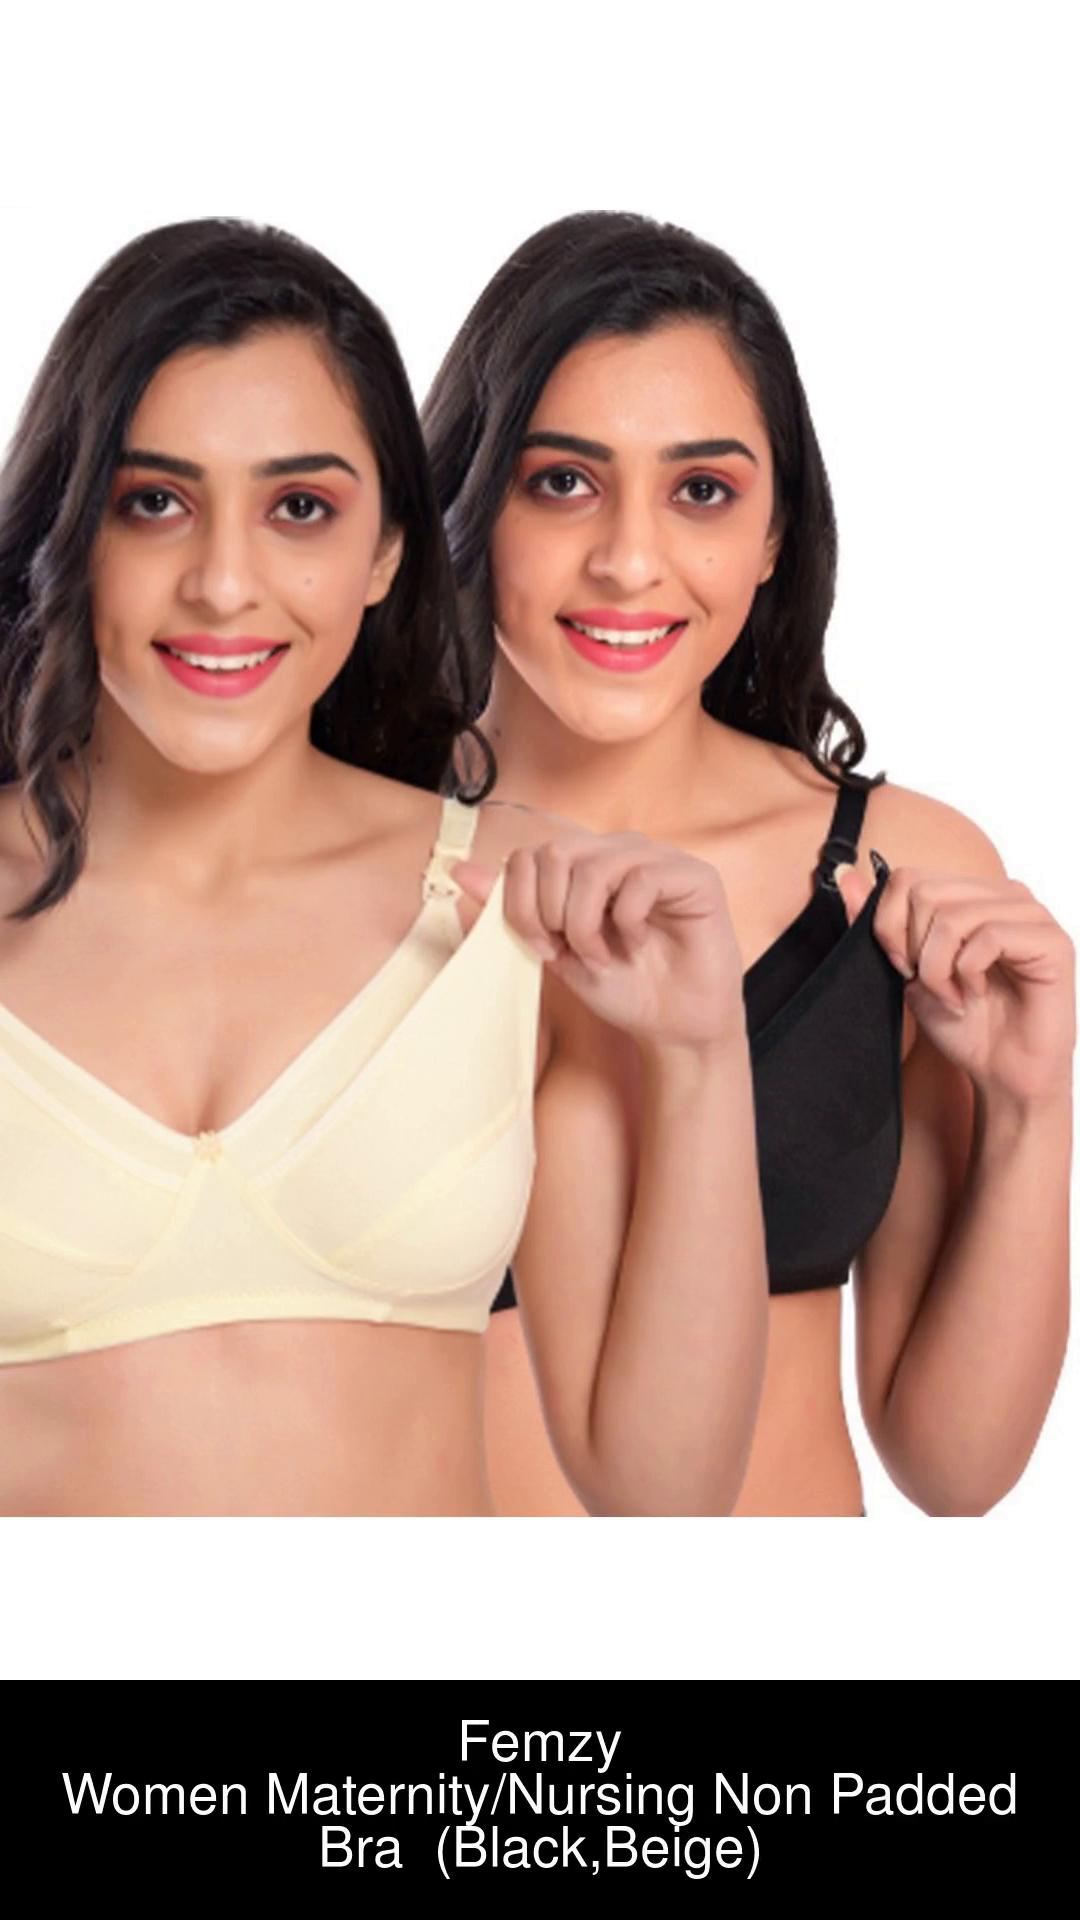 Femzy Women Maternity/Nursing Non Padded Bra - Buy Femzy Women  Maternity/Nursing Non Padded Bra Online at Best Prices in India